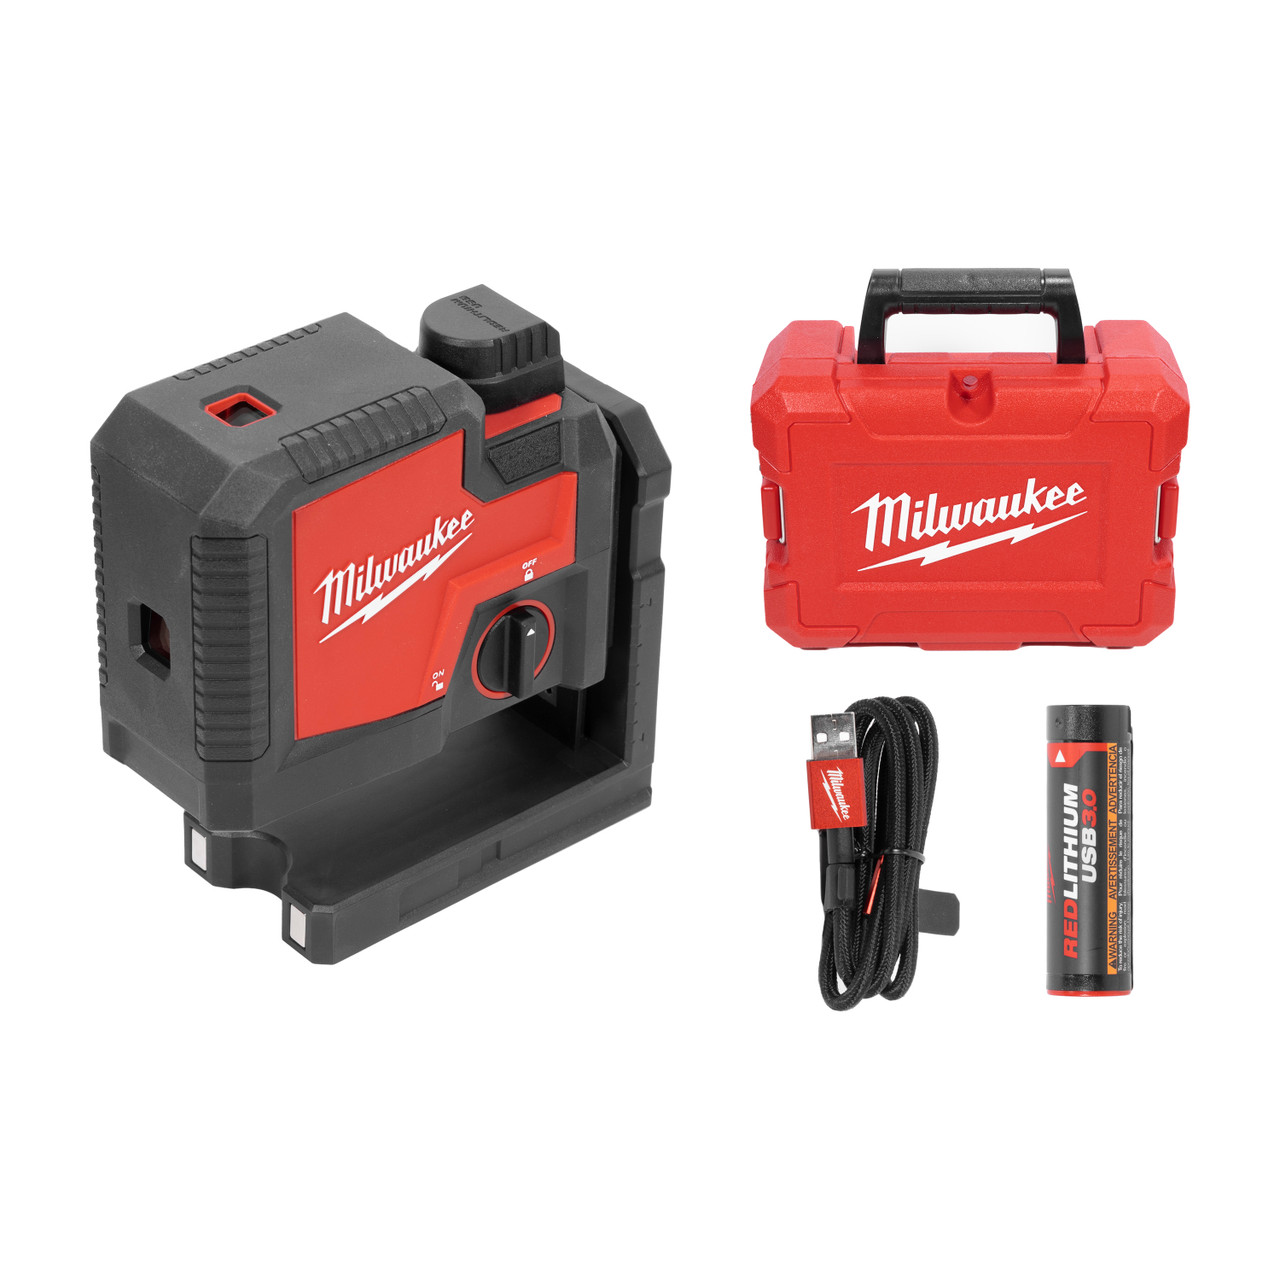 Milwaukee 3-Point Laser Level Green USB Rechargeable (3510-21